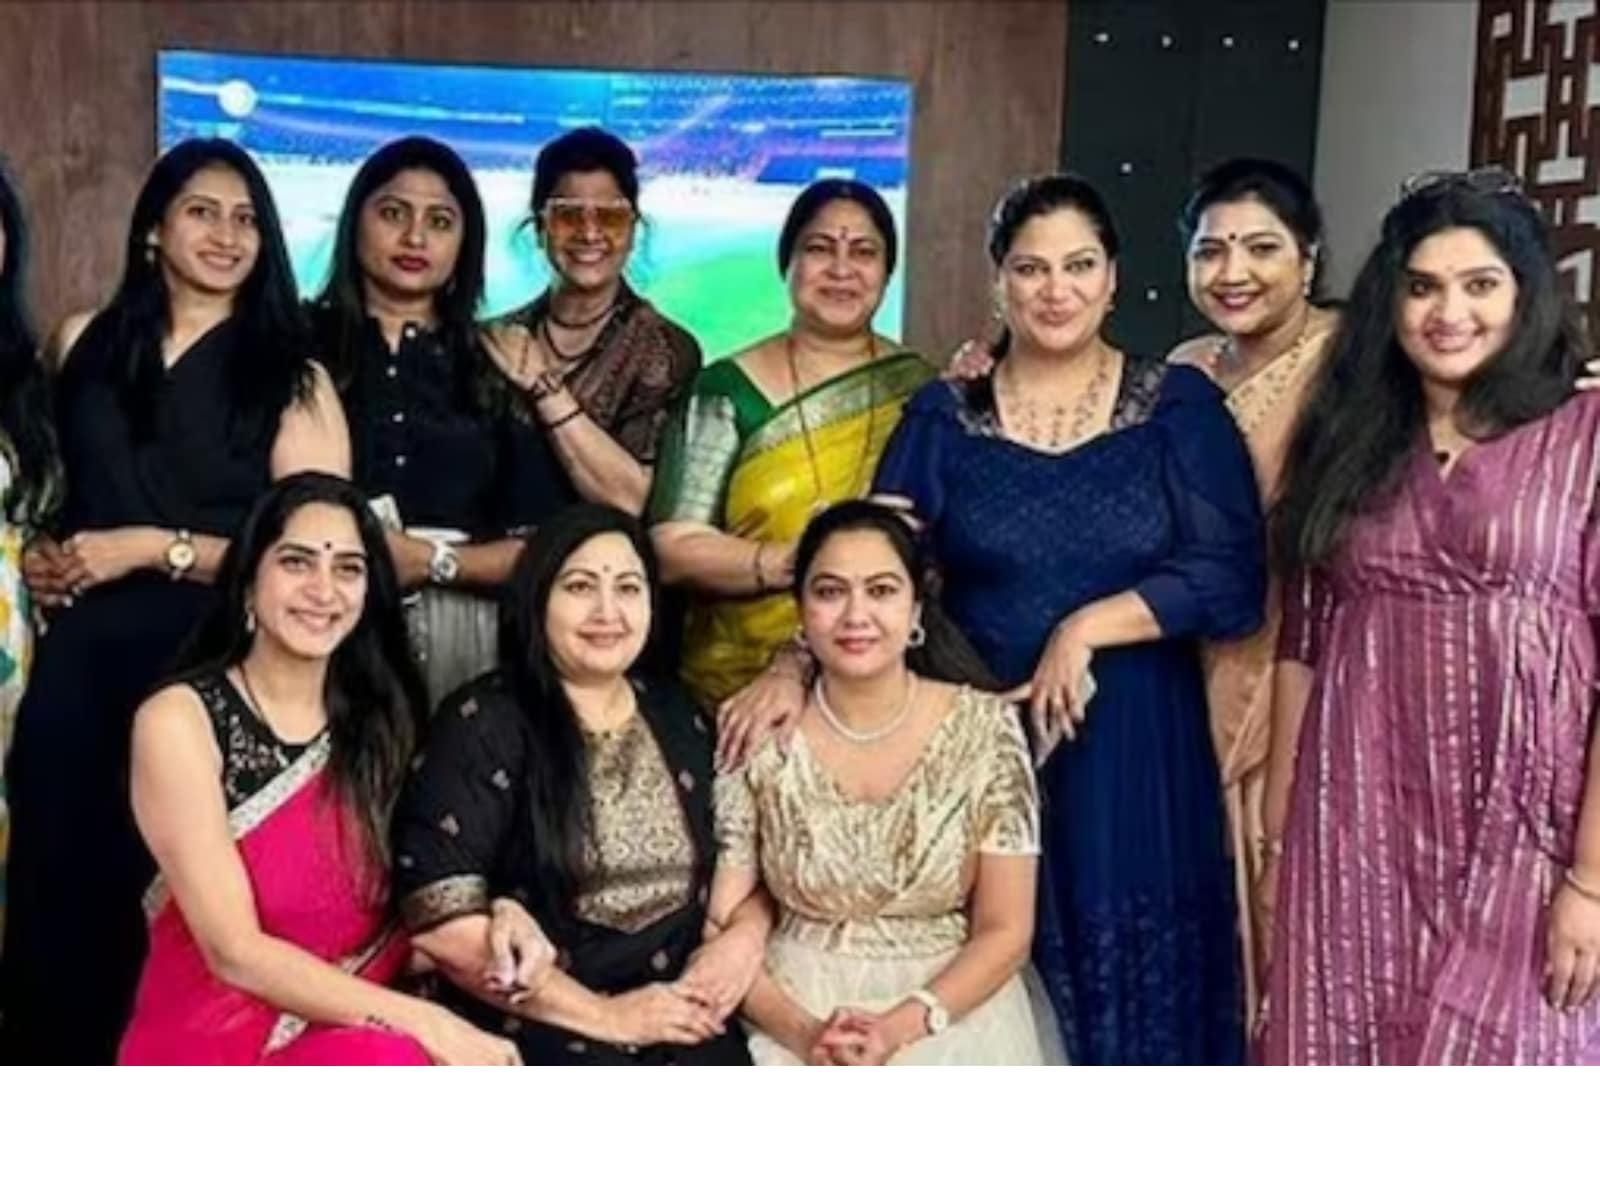 Surekha Vani and her friends enjoy fun time at house party, watch video -  News18